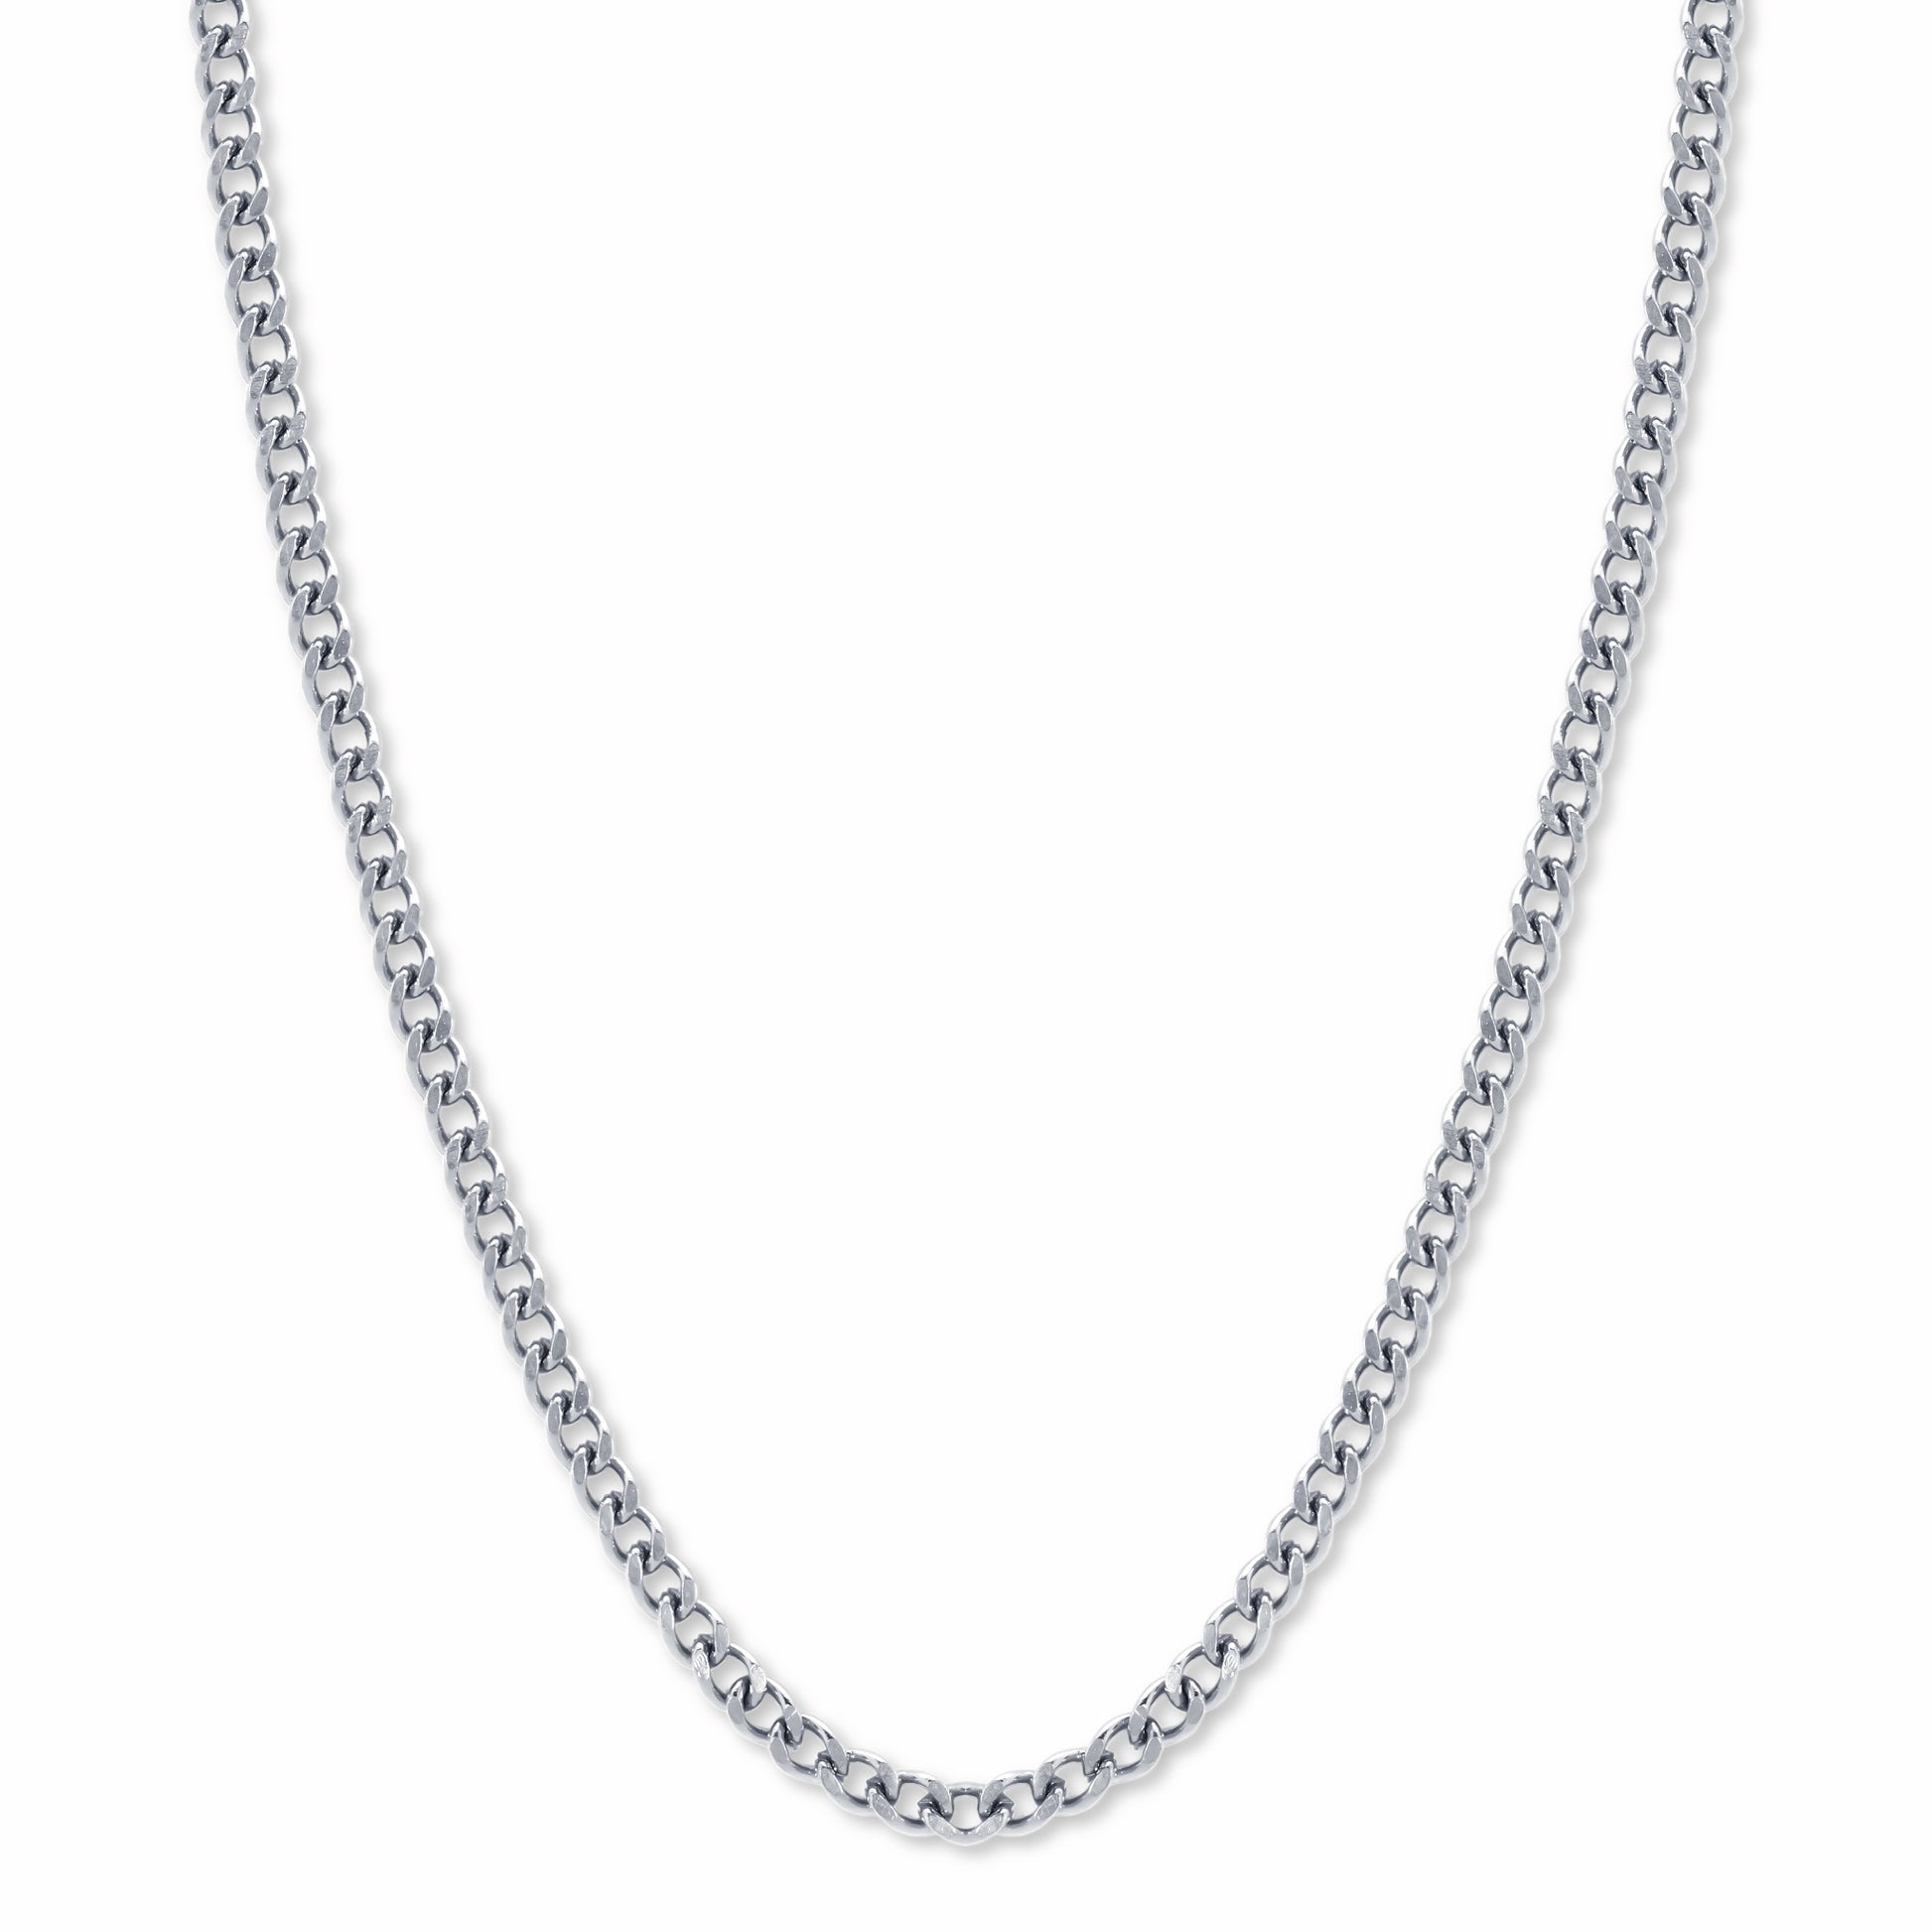 Micro Cuban Link Chain Silver 3mm on white background